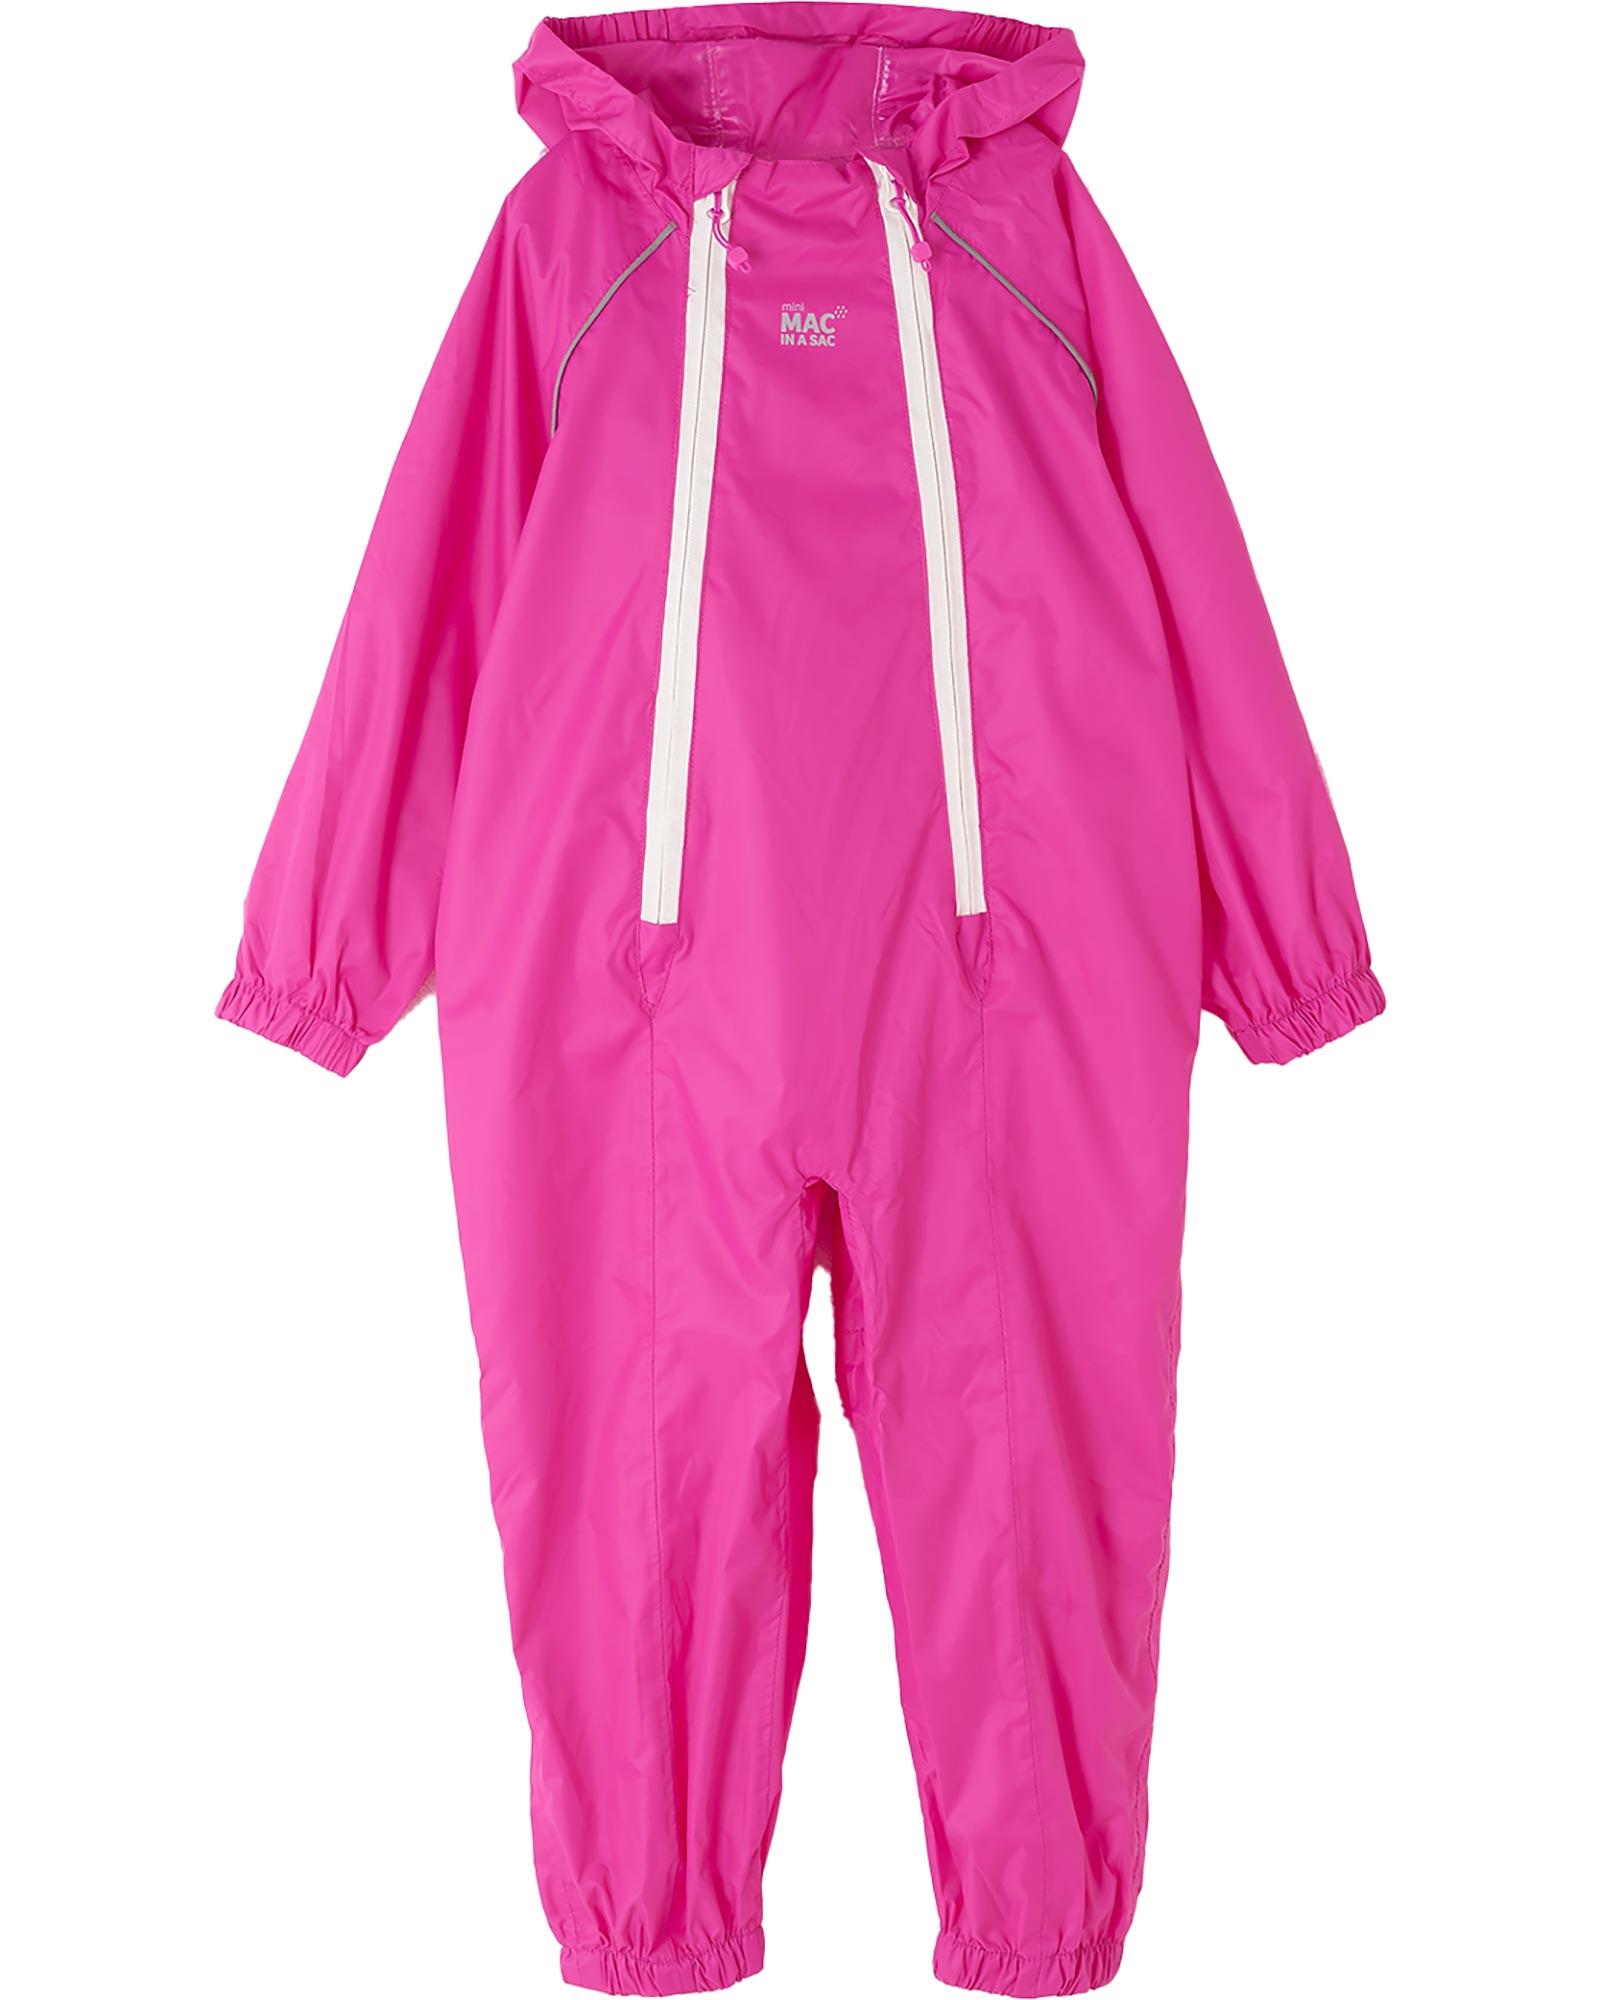 Target Dry Mac in a Sac Puddlesuit - Pink 2-3 Years